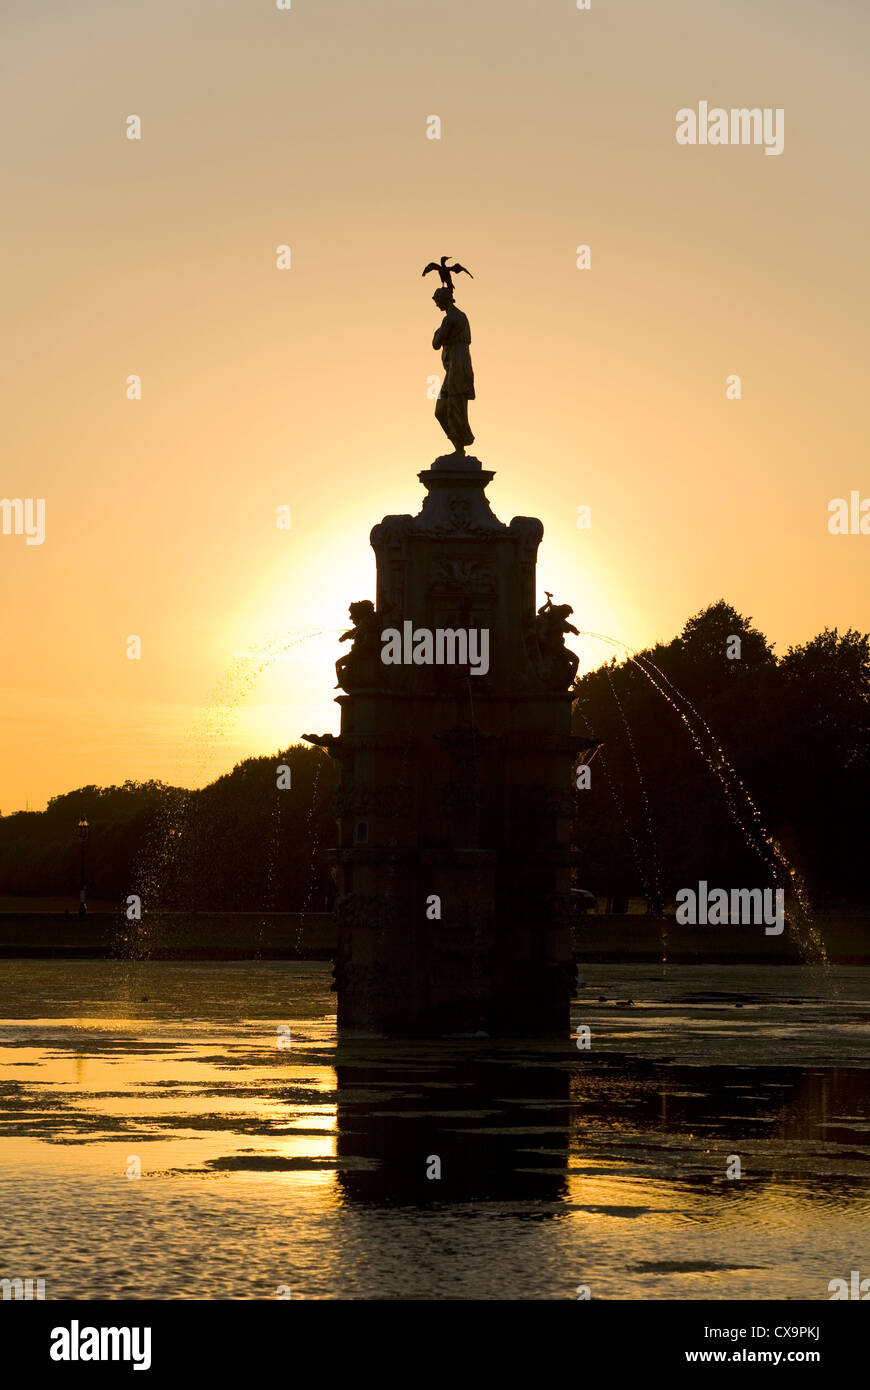 The Arethusa 'Diana' Fountain Bushy Park UK  at sunset, shown after re-gilding, restoration & cleaning. A bird is on the statue. Stock Photo